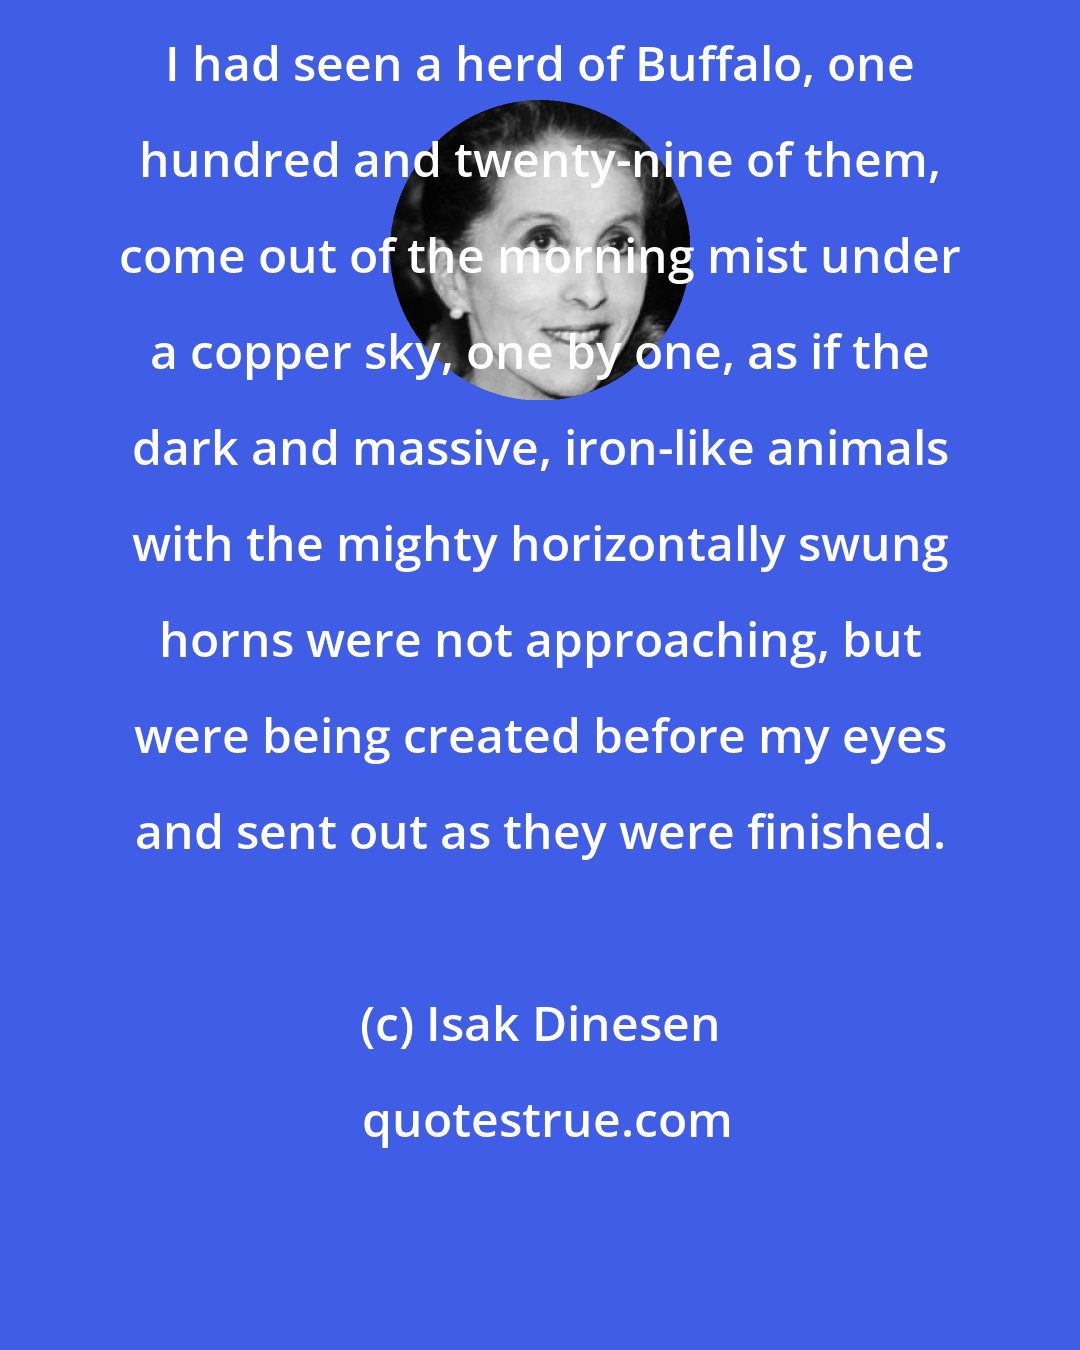 Isak Dinesen: I had seen a herd of Buffalo, one hundred and twenty-nine of them, come out of the morning mist under a copper sky, one by one, as if the dark and massive, iron-like animals with the mighty horizontally swung horns were not approaching, but were being created before my eyes and sent out as they were finished.